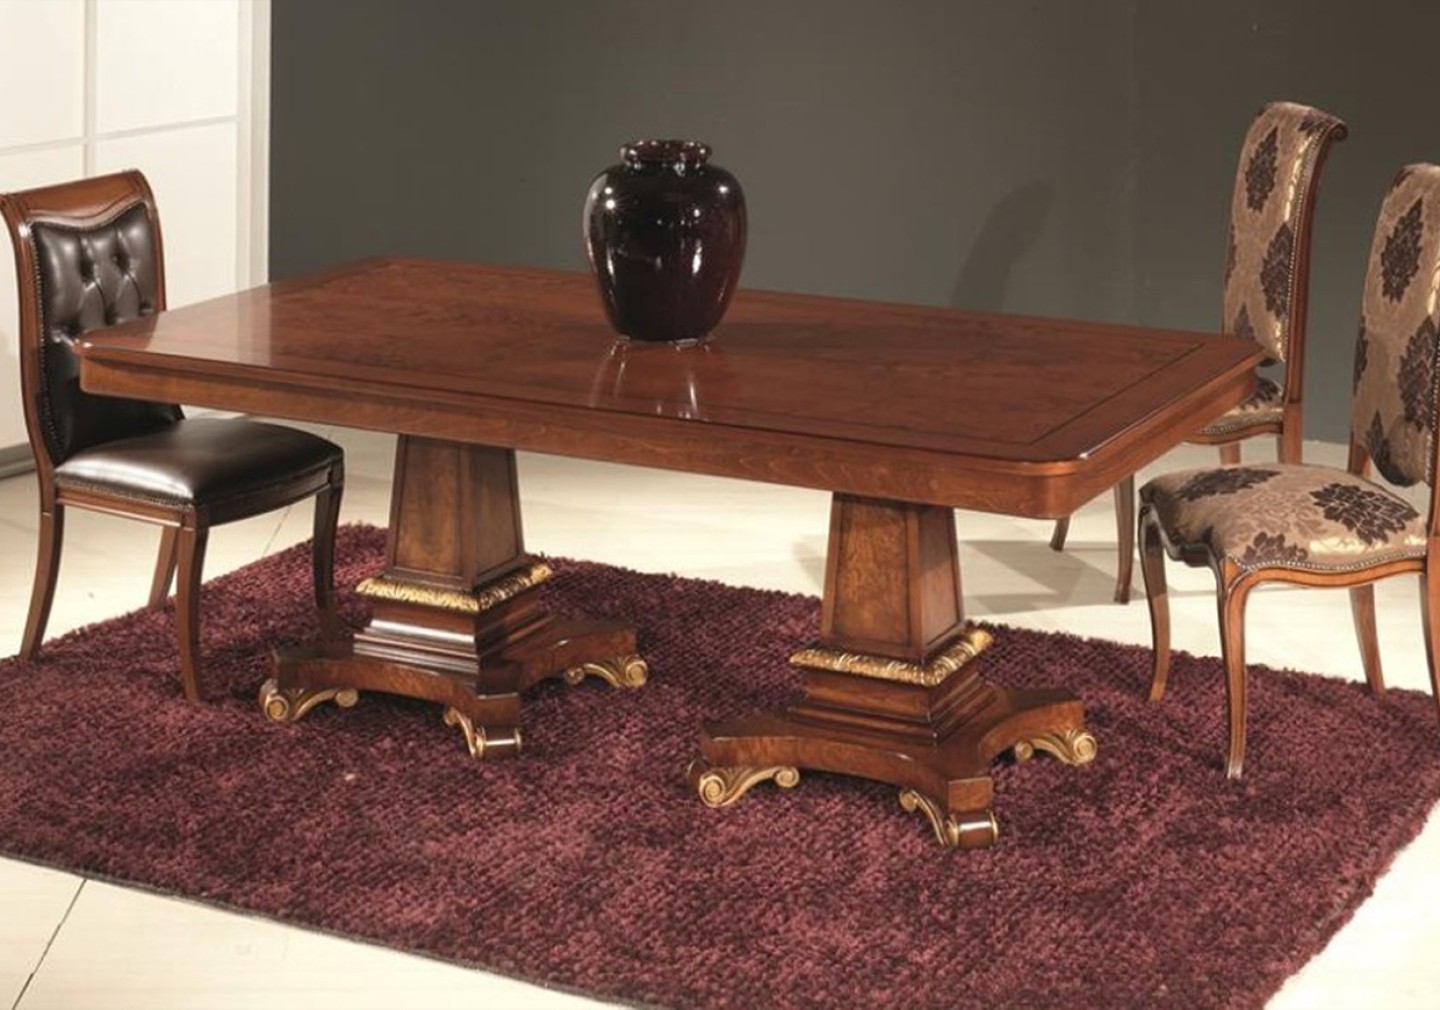 THE MODITO CLASSIC DINING TABLE